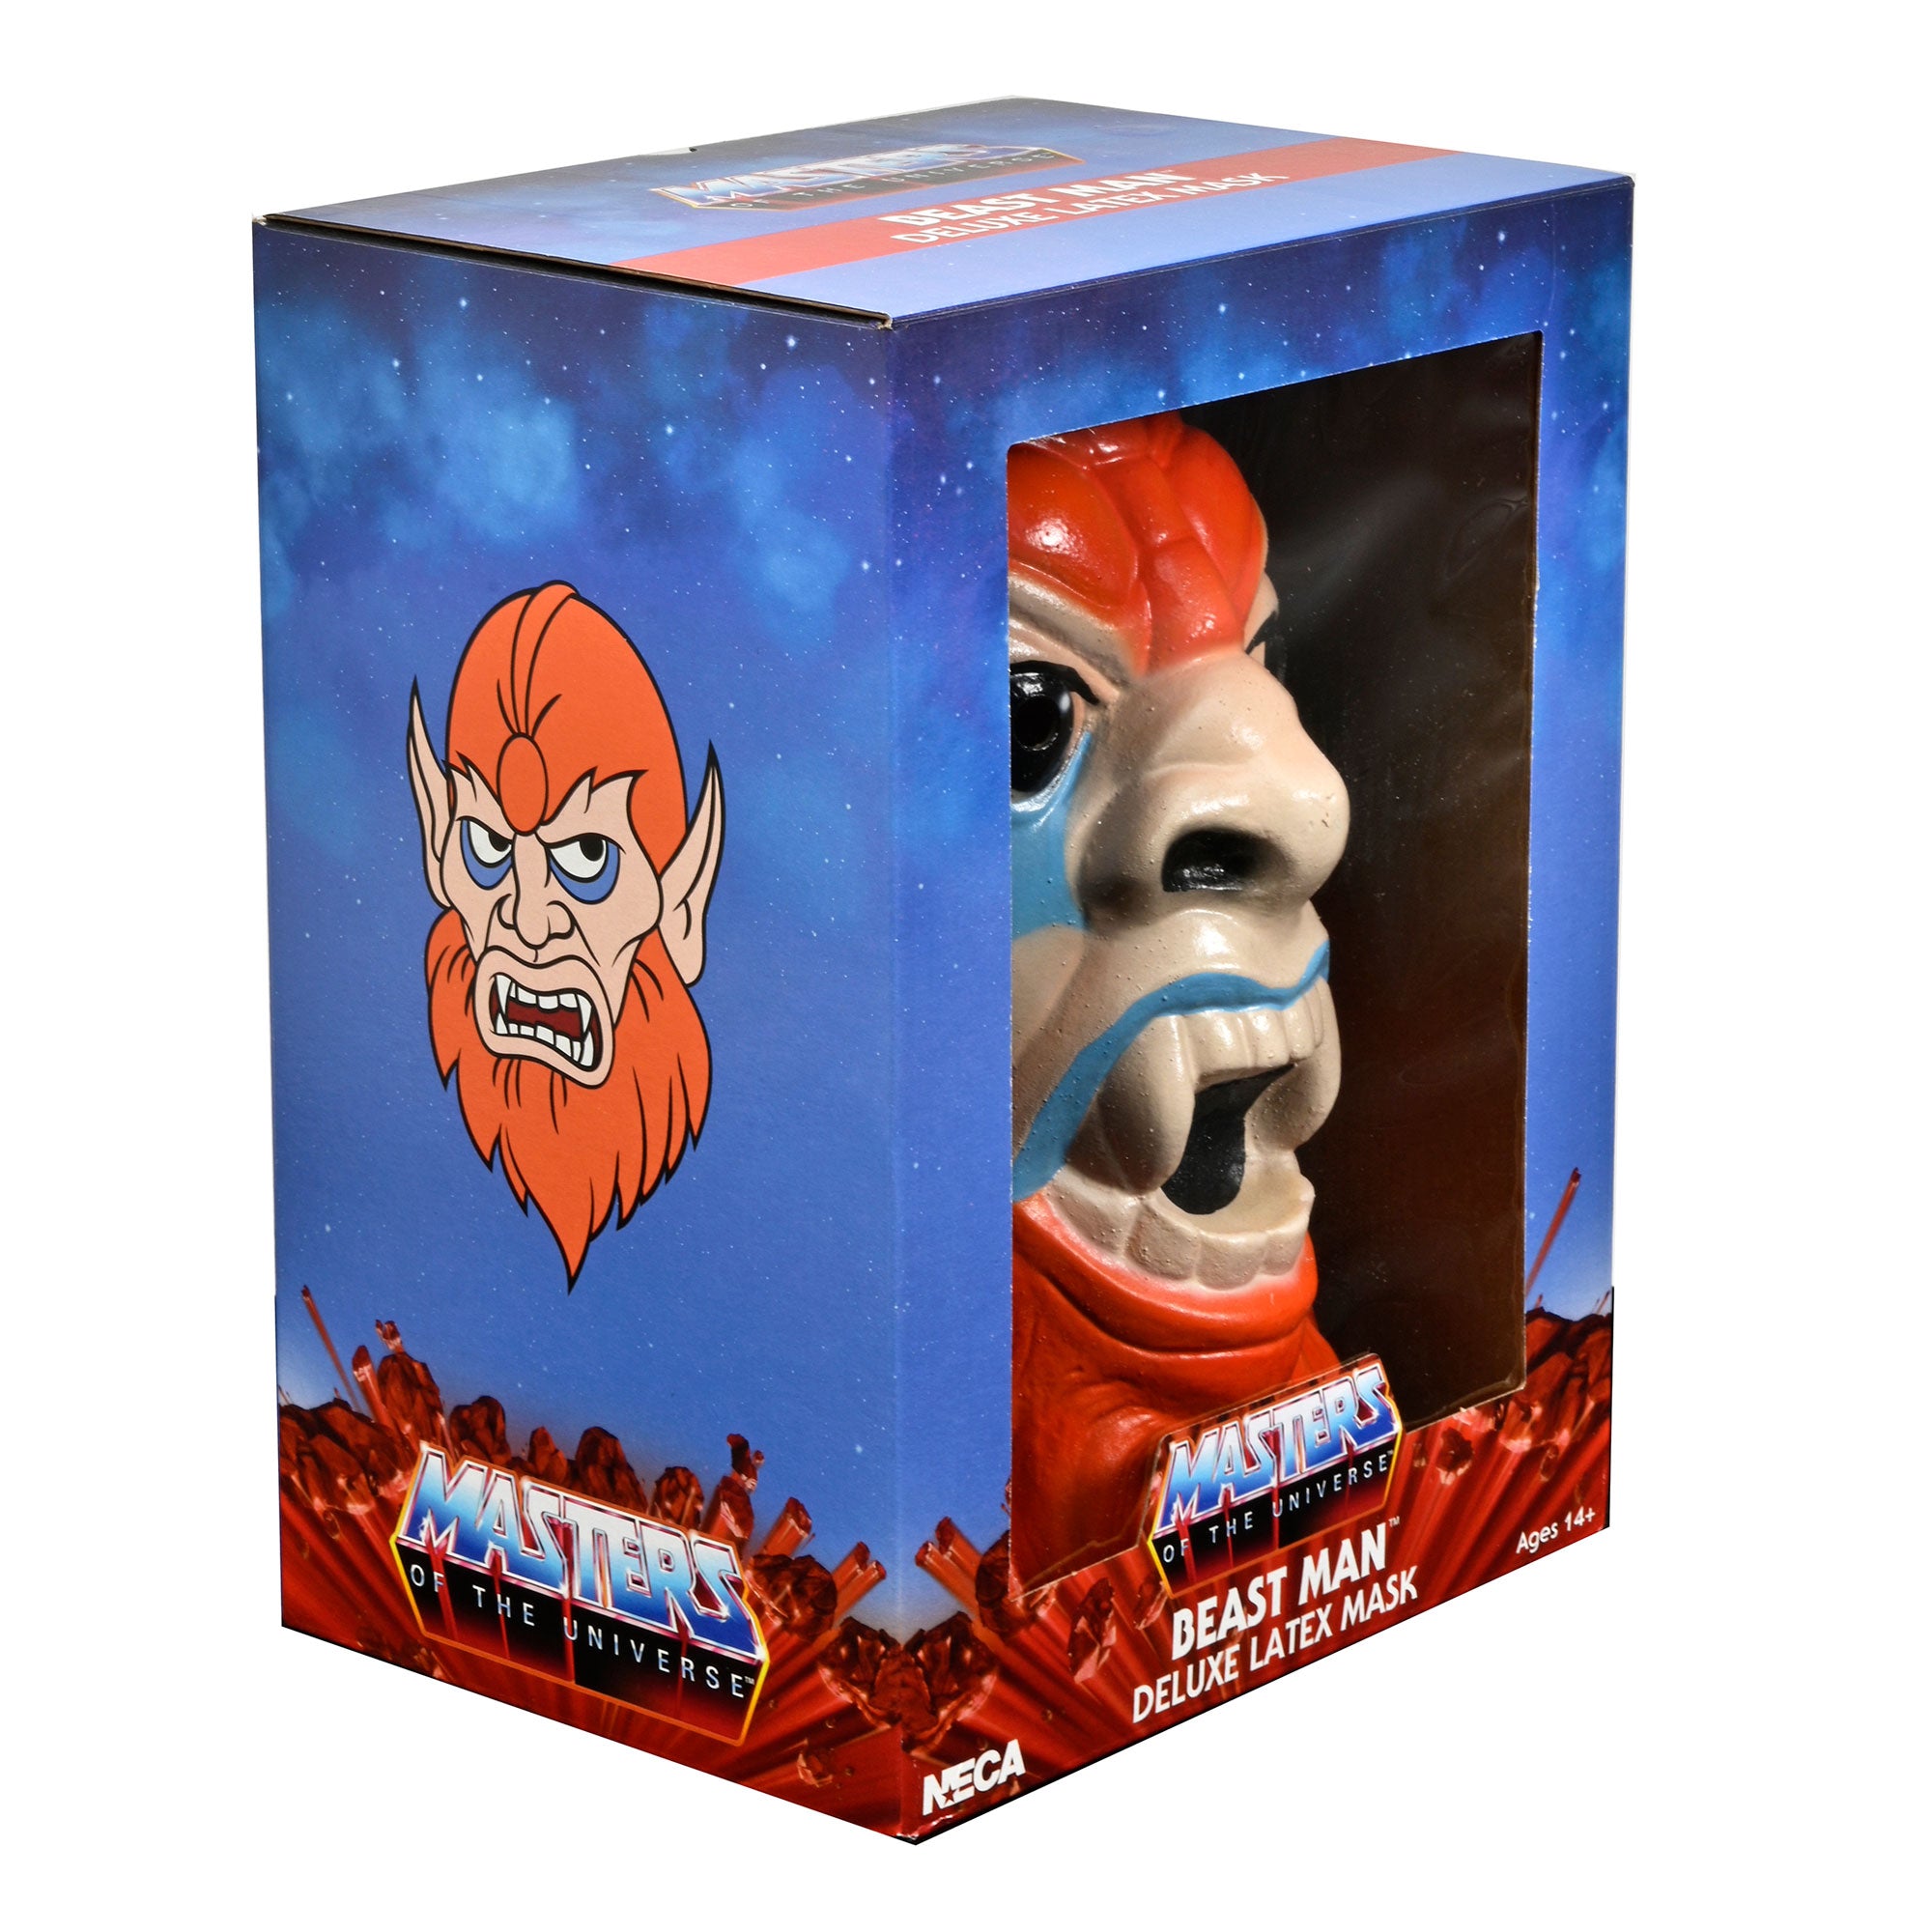 Masters of the Universe Beast Man Deluxe Latex Mask Packaging - Side of Box